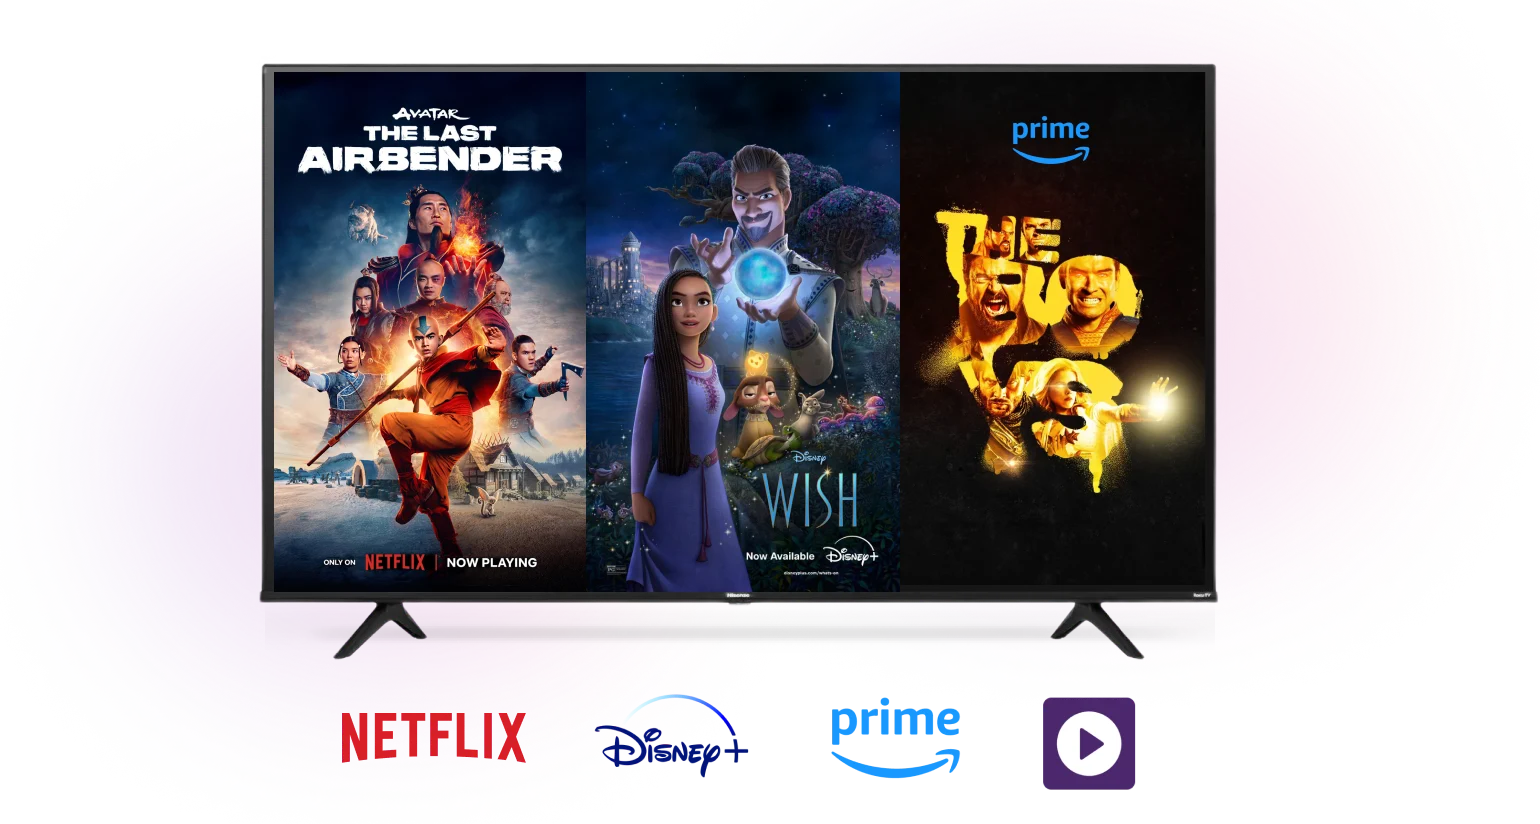 A TV screen showing posters for the Netflix series The Last Airbender, the Disney+ film Wish and the Prime series The Boys. Netflix, Disney+, Amazon Prime and Stream+ logos.